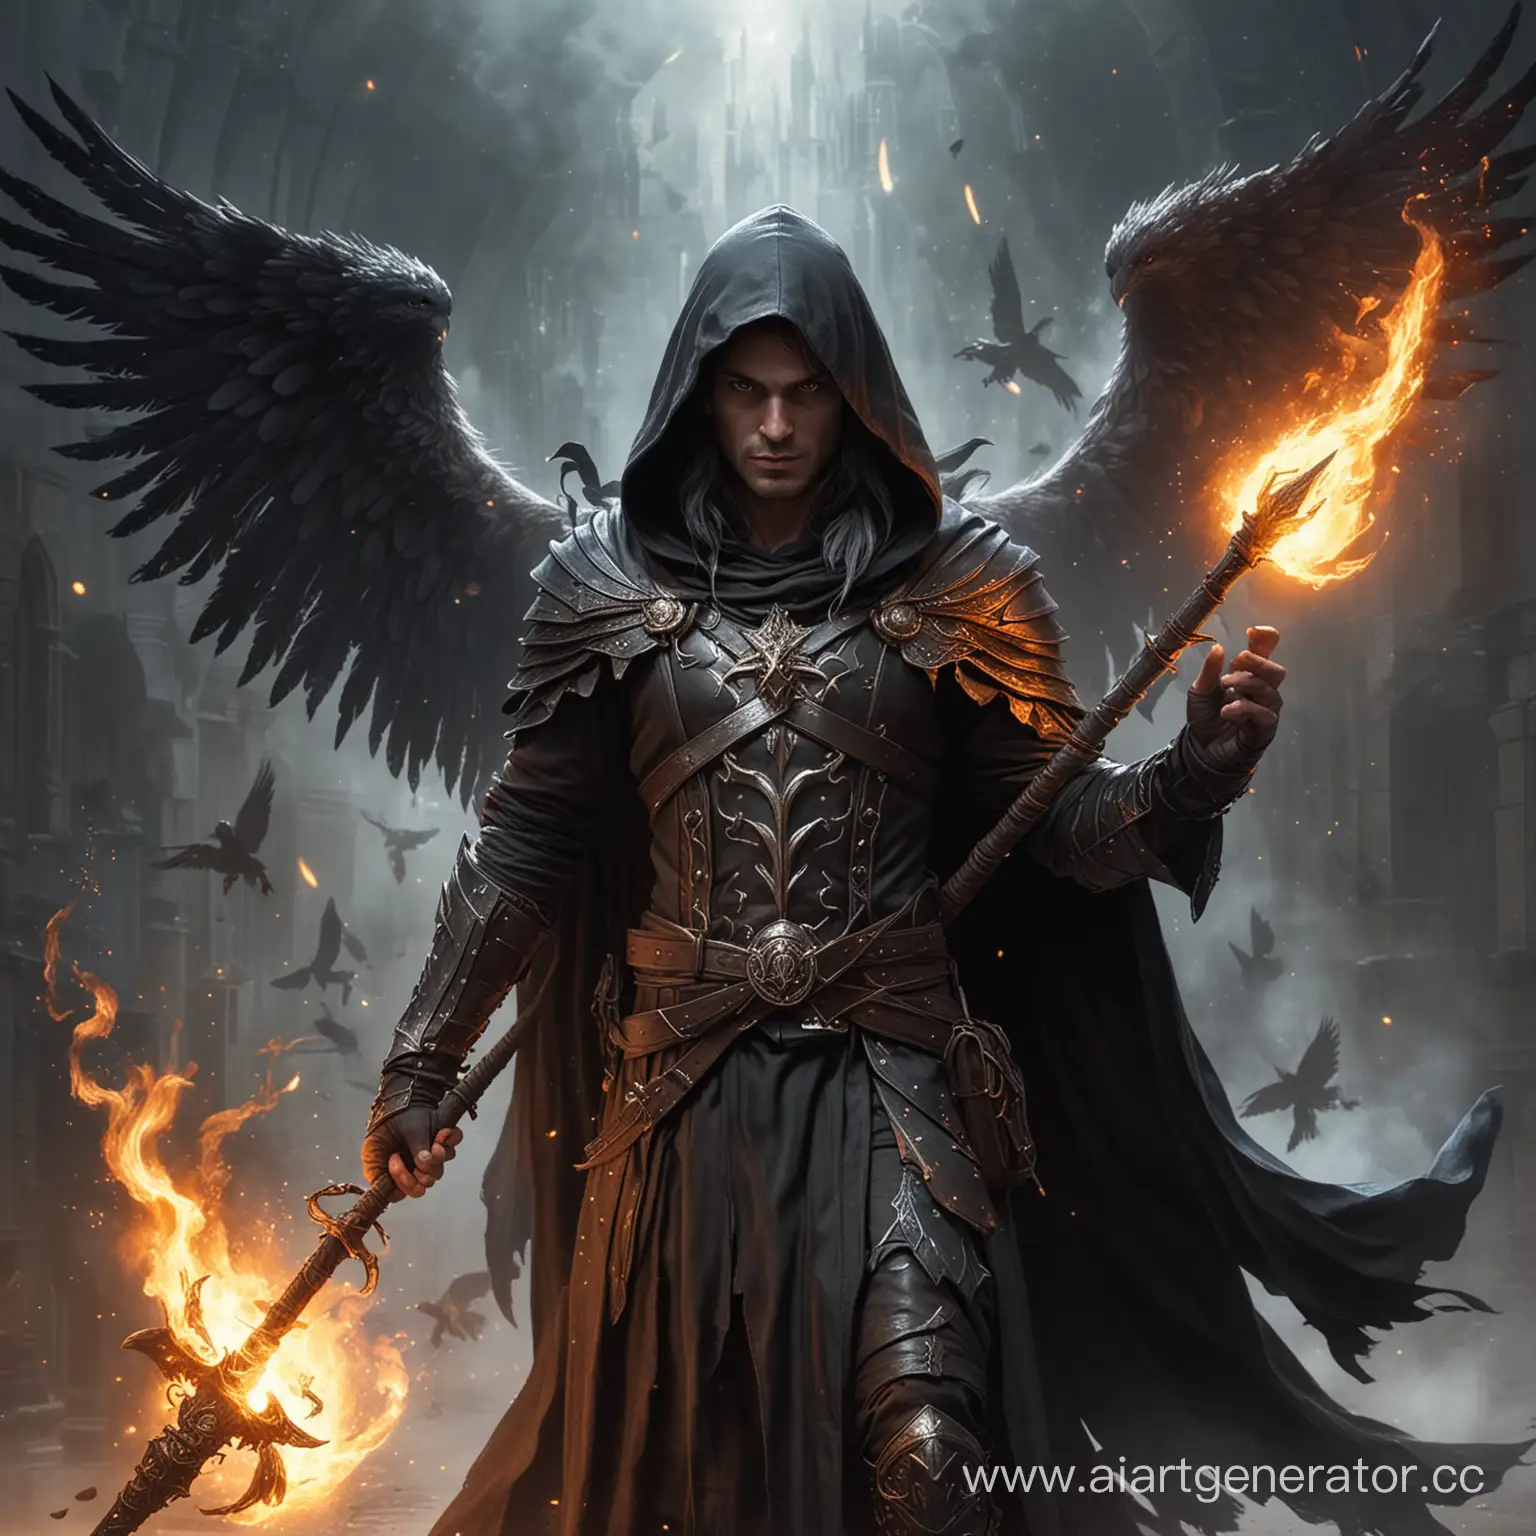 the magician Aasimar in a dark hood with a staff of fire and wings sticking out from behind